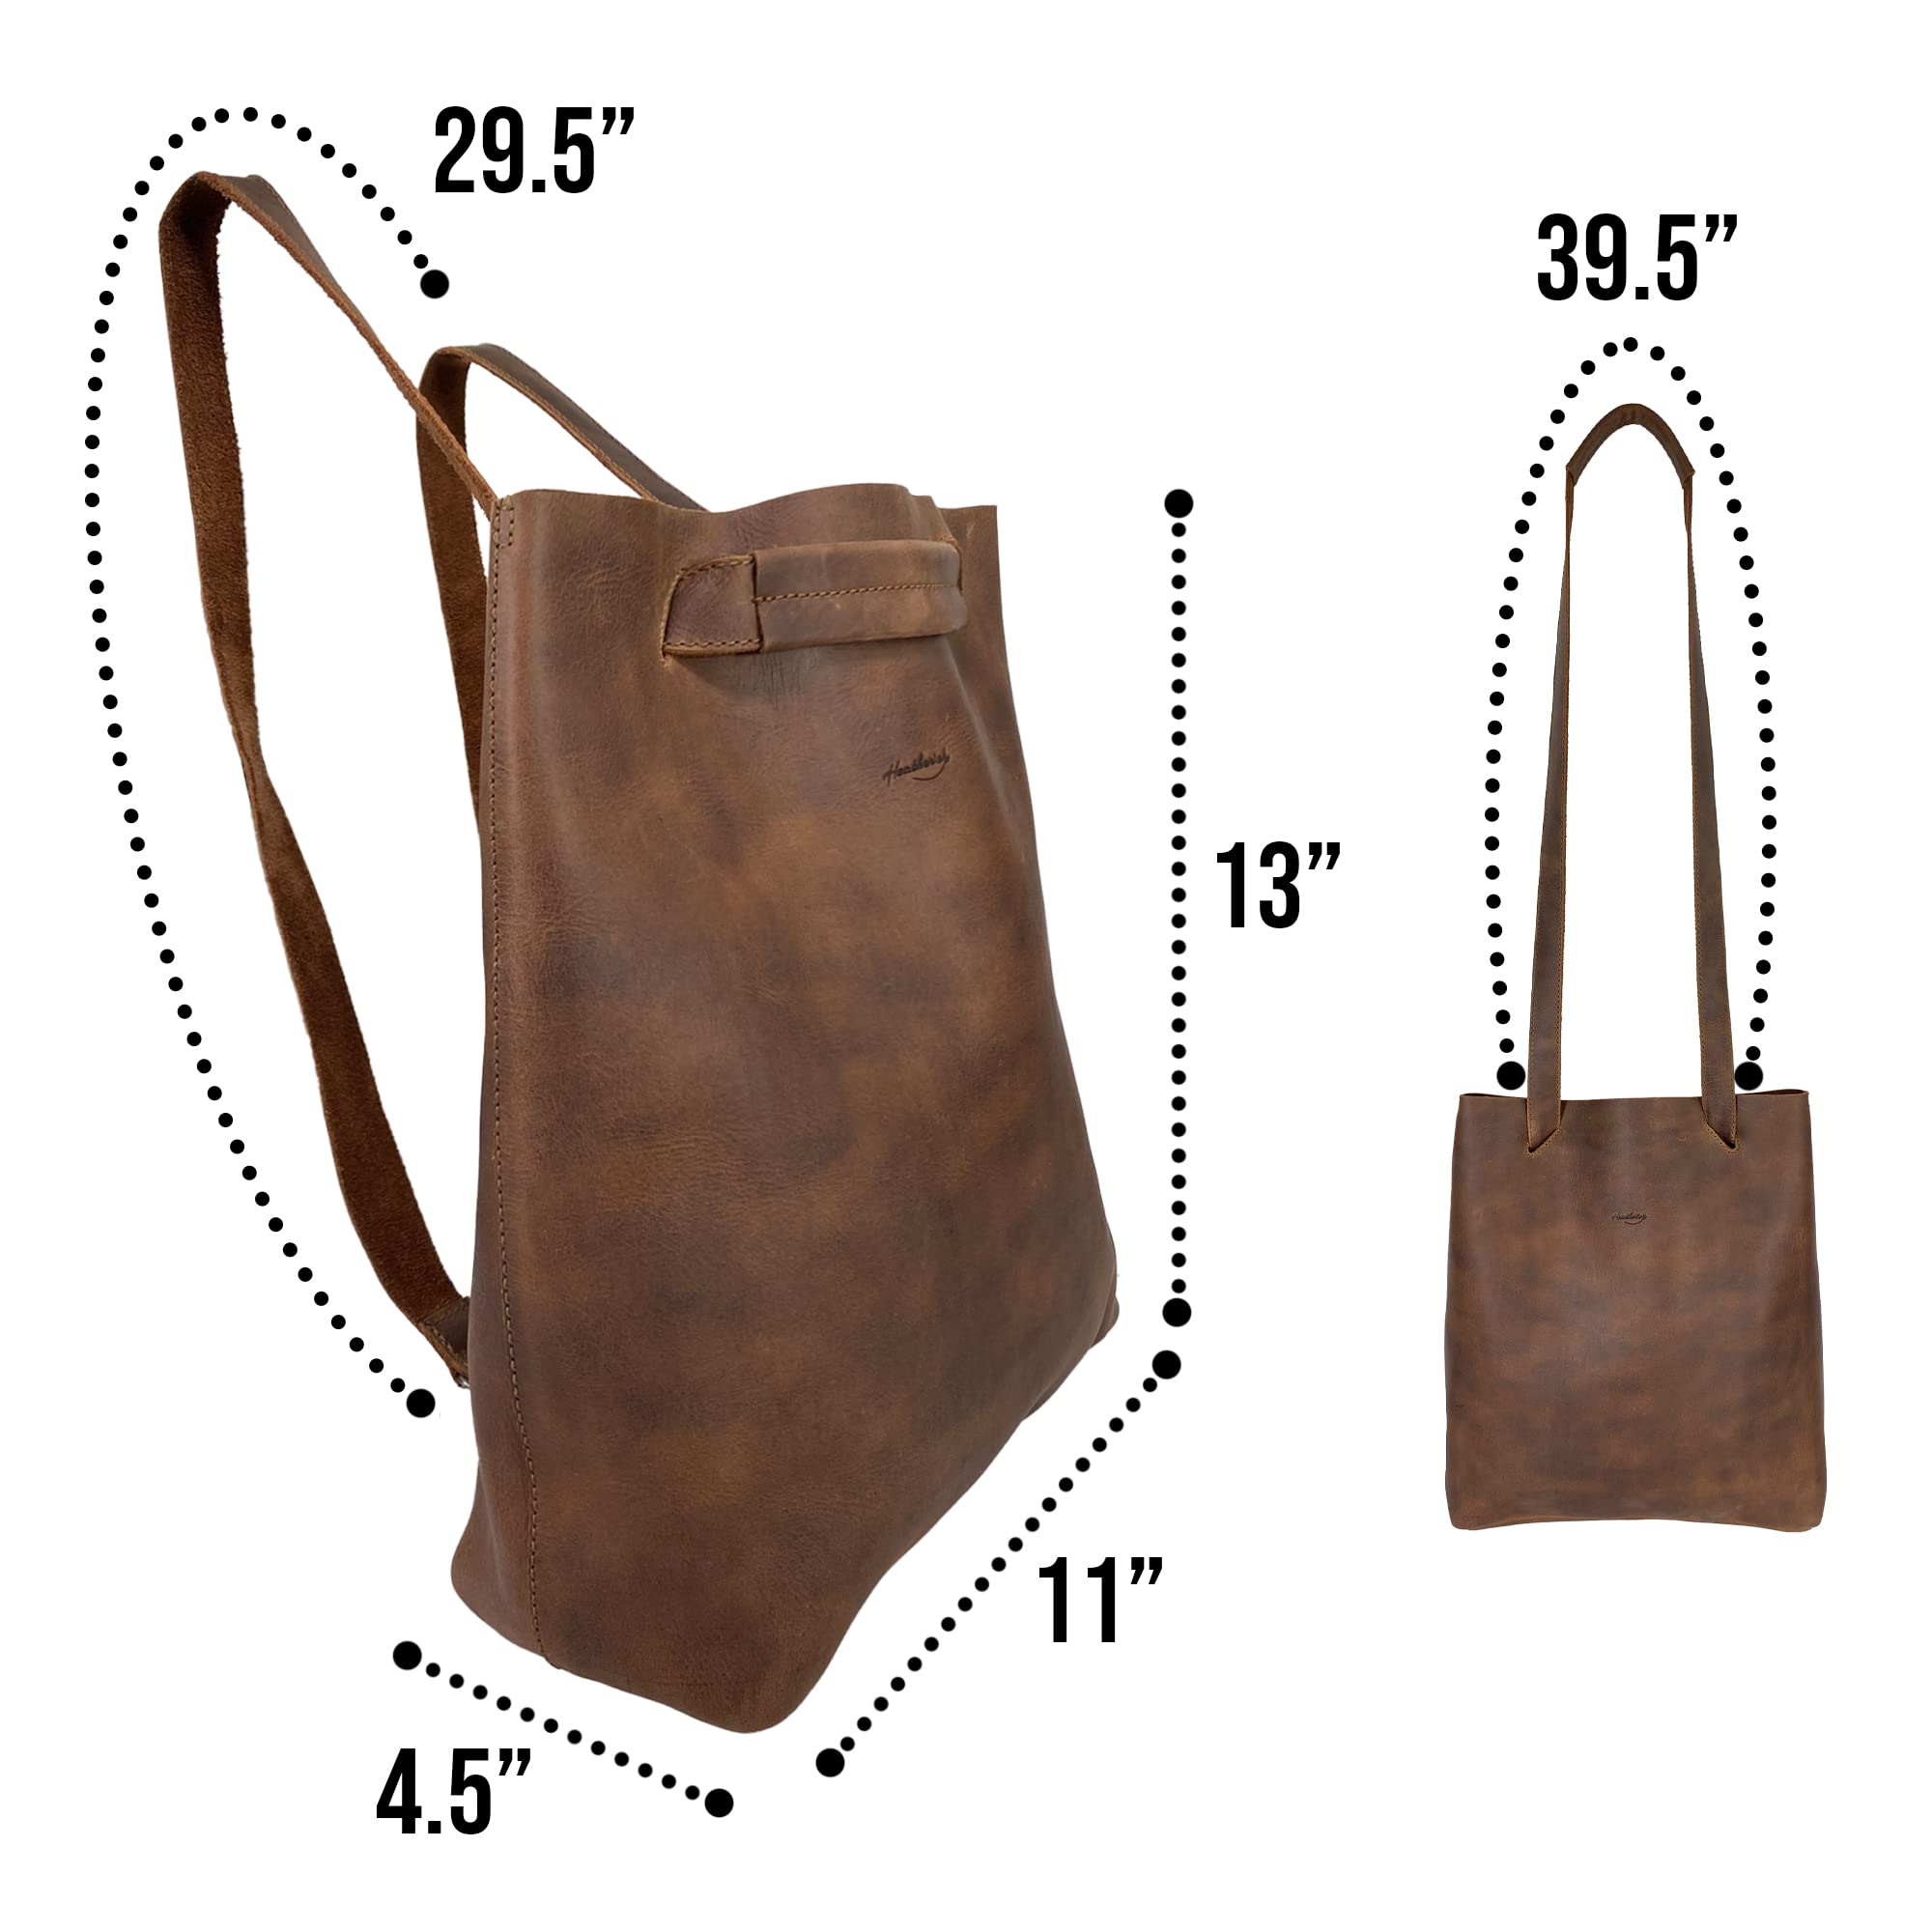 Heather's, Convertible Backpack to Shoulder Bag Handmade from Full Grain Leather - Durable, Spacious Bag, Travel & Shopping Accessory - Bourbon Brown